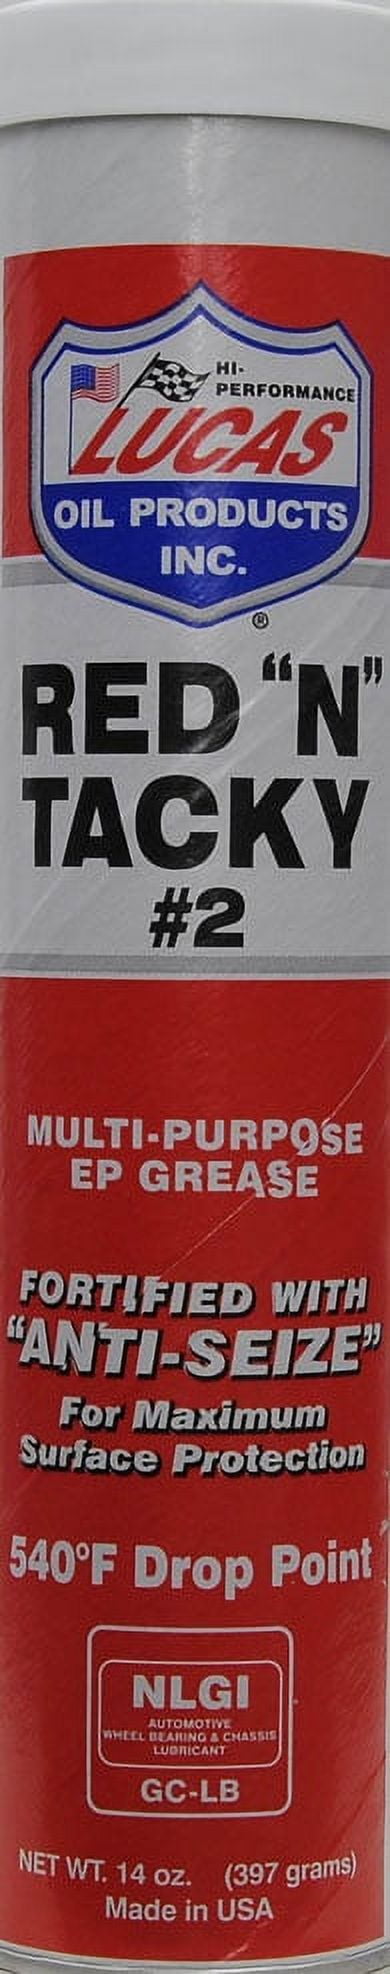 LUCAS OIL RED N TACKY GREASE Dose universal Lagerfett 454g 10574 Auto,  12,90 €